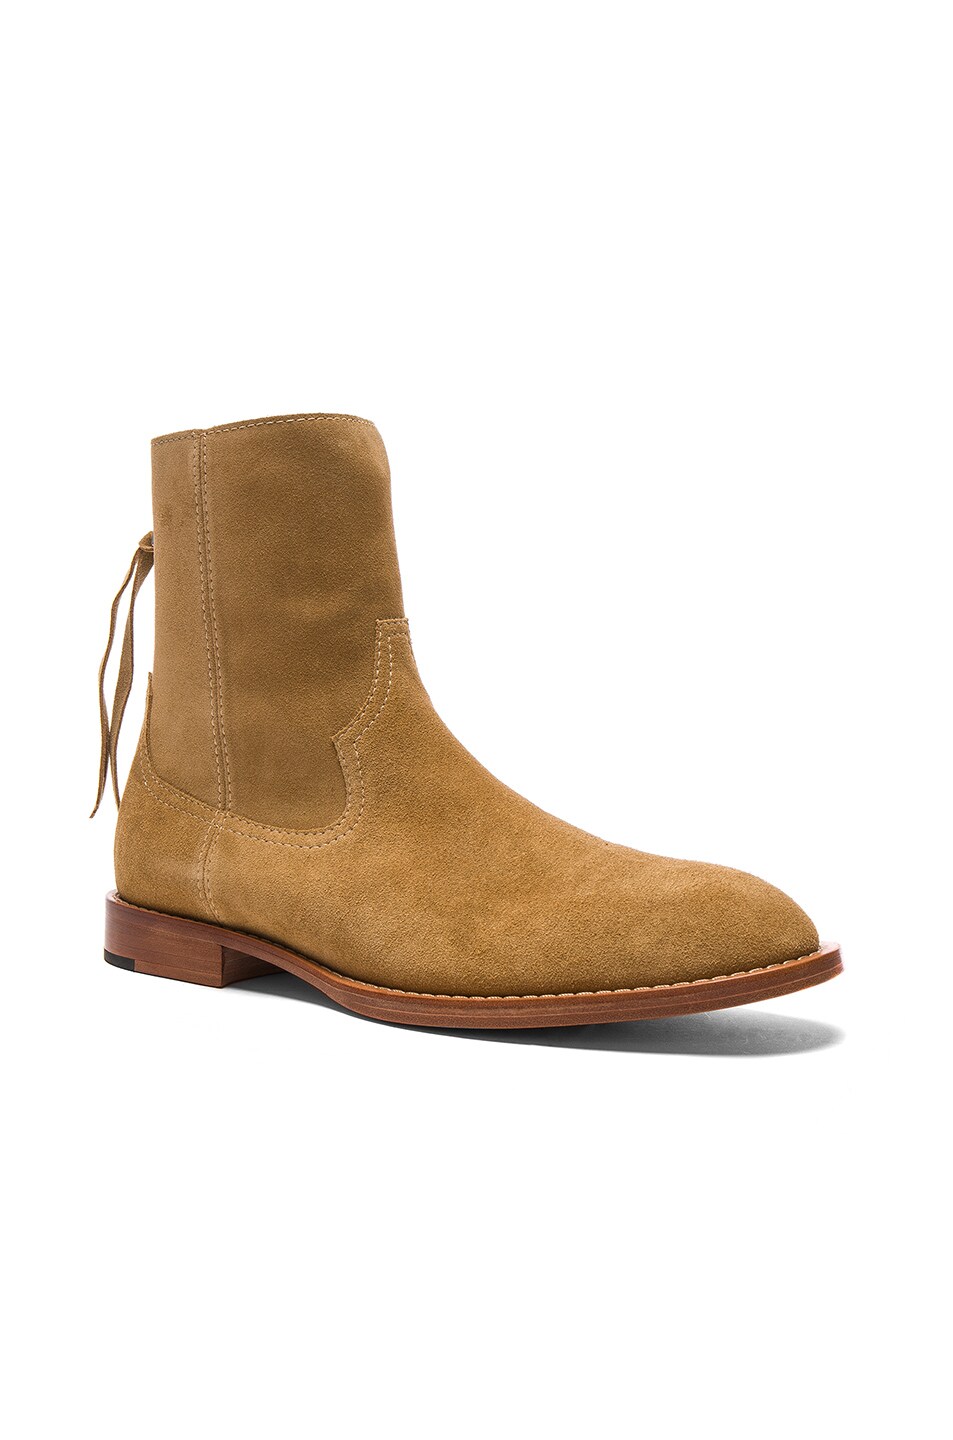 Image 1 of Amiri Suede Shane Boots in Tan Suede